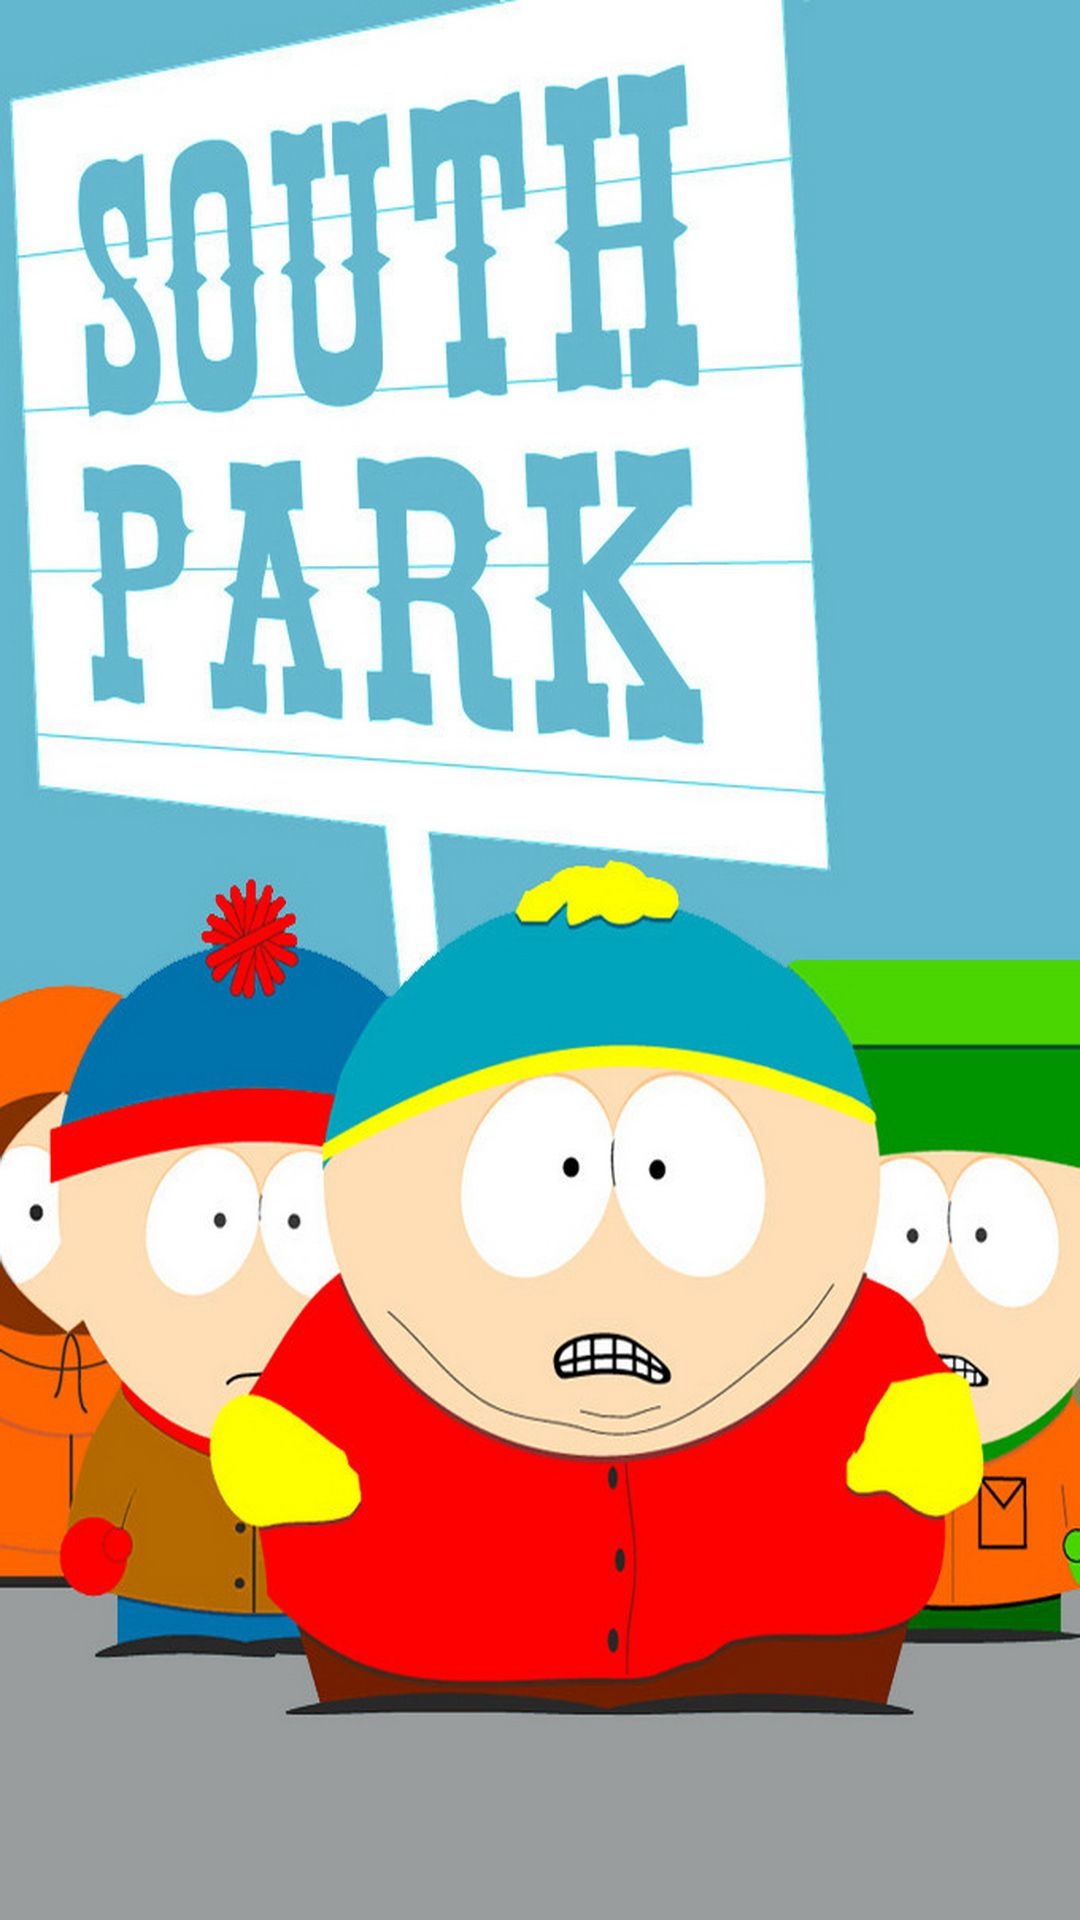 South Park phone wallpapers, High-resolution images, Mobile backgrounds, 1080x1920 Full HD Phone